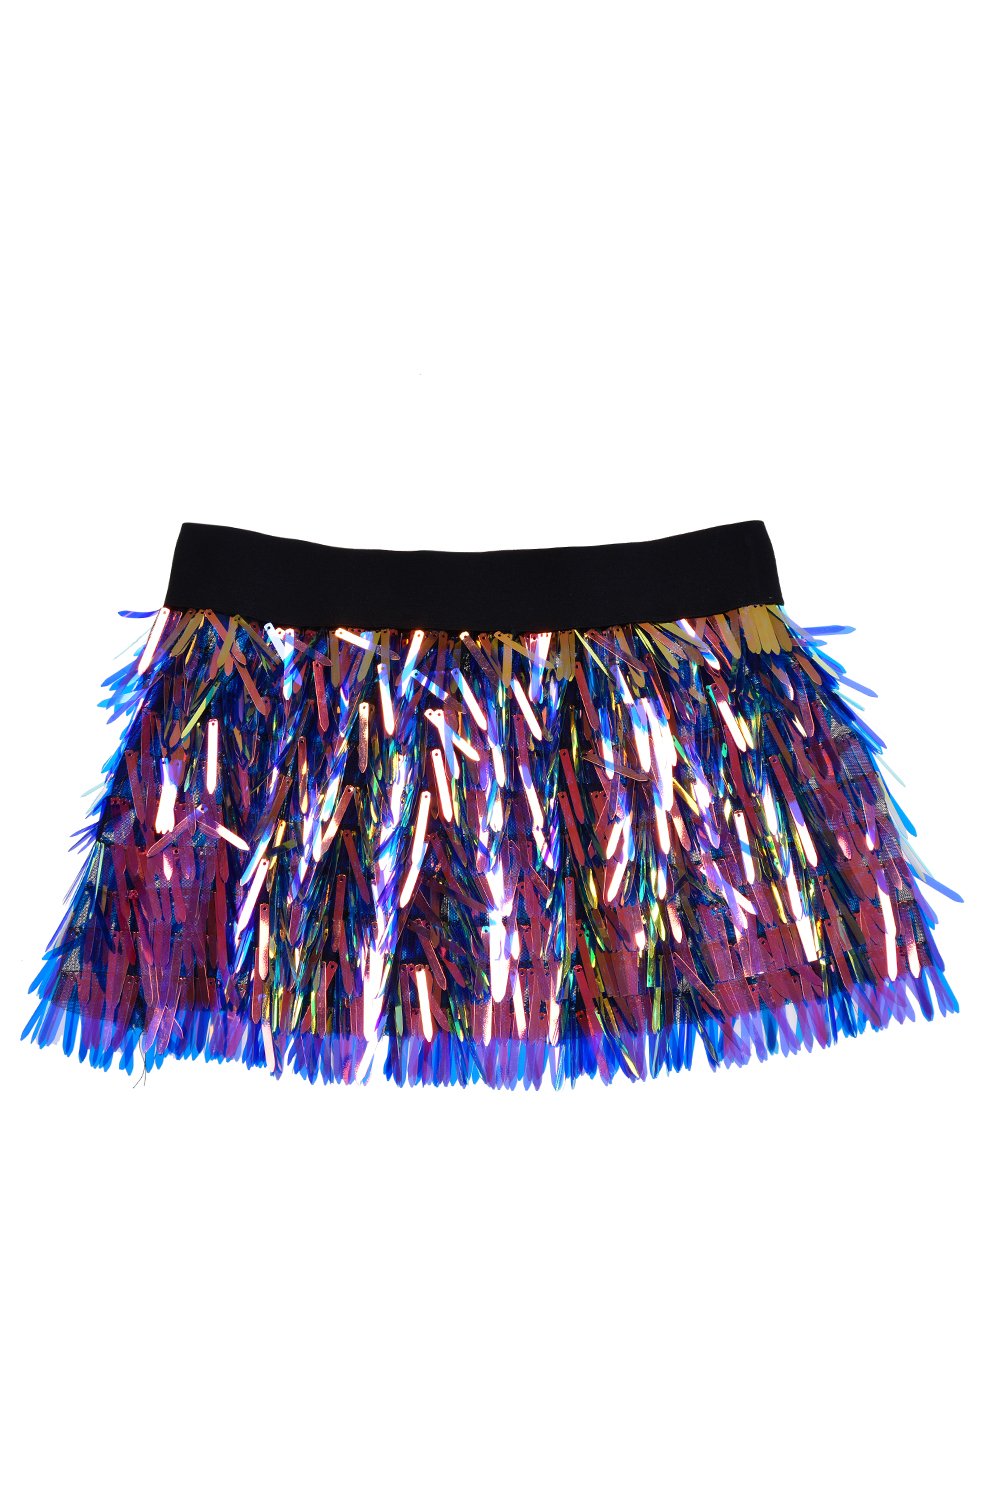 Outer Space Mini Sequin Skirt Rave clothes,rave outfits,edc – THE LUMI SHOP